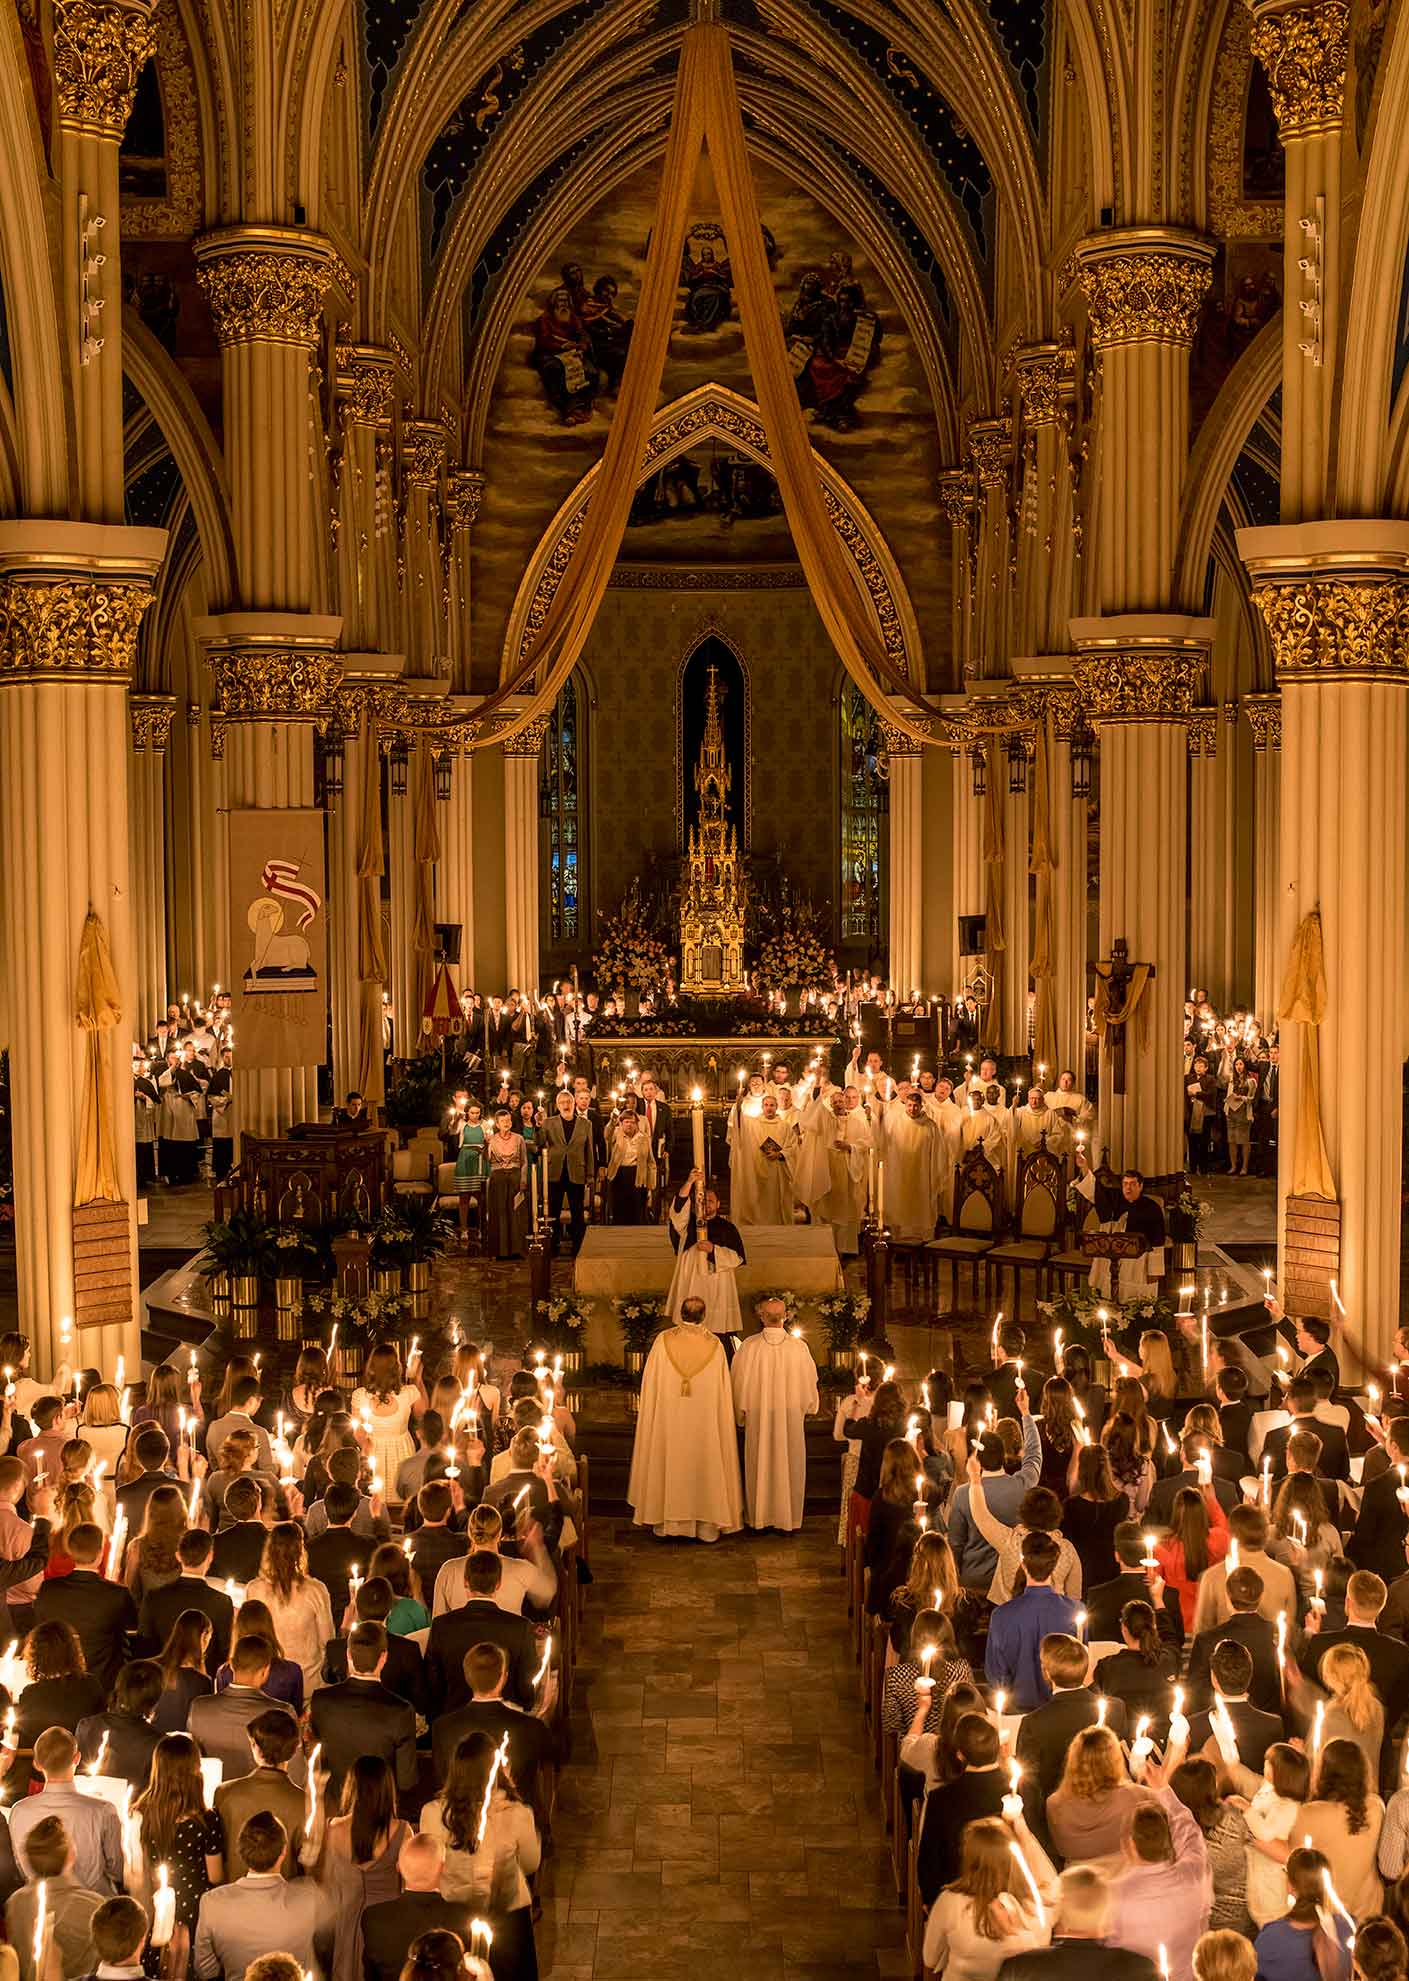 Apr. 4, 2015; Easter Vigil Mass in the Basilica of the Sacred Heart. (Photo by Barbara Johnston/University of Notre Dame)